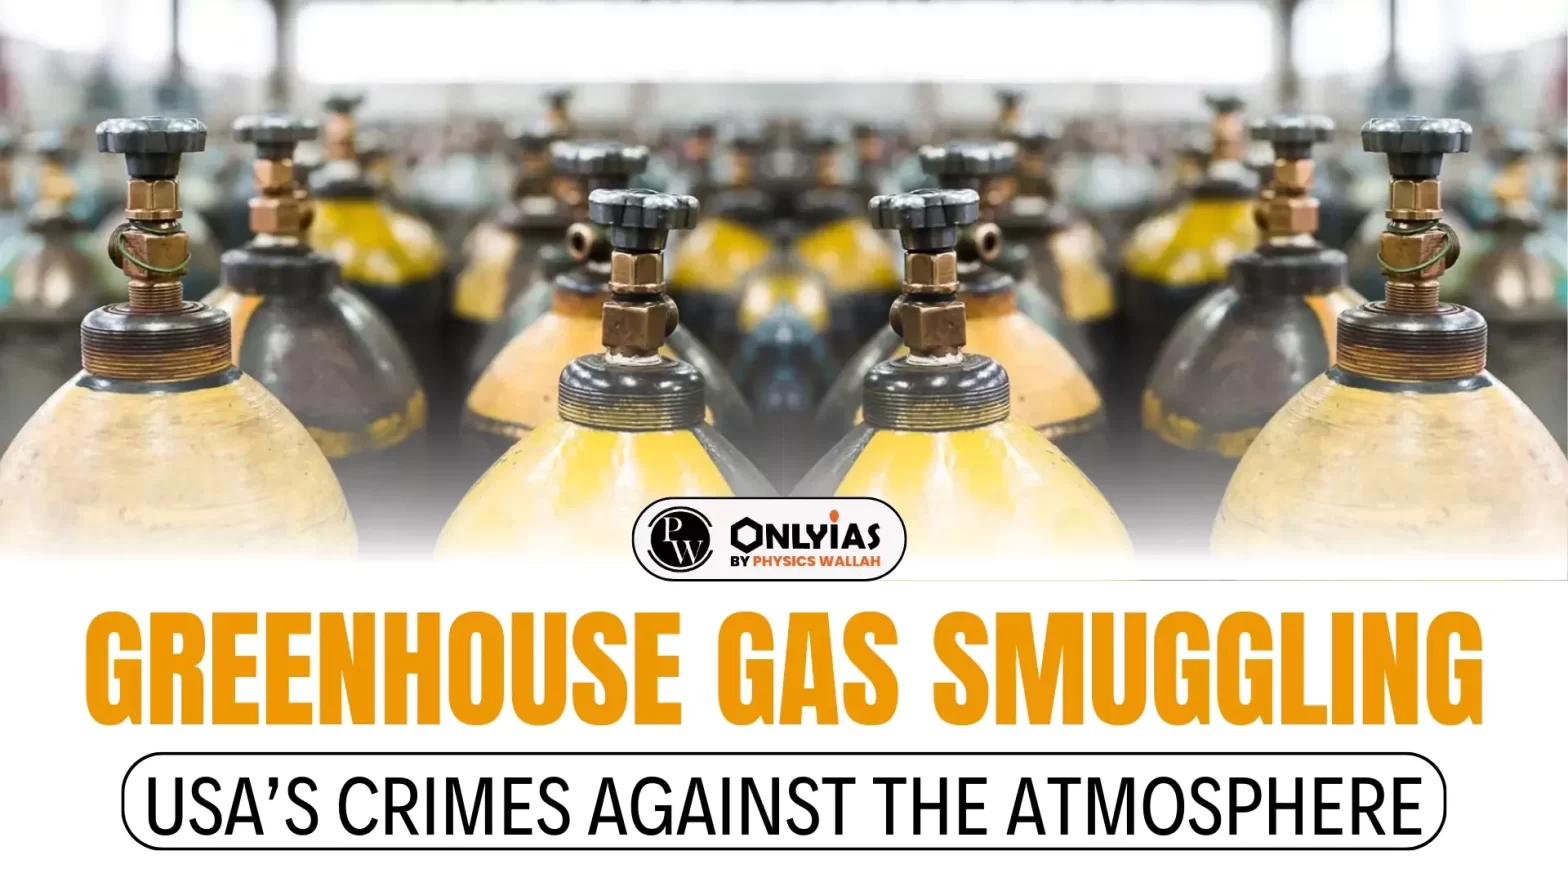 Greenhouse Gas Smuggling: USA’s Crimes Against the Atmosphere